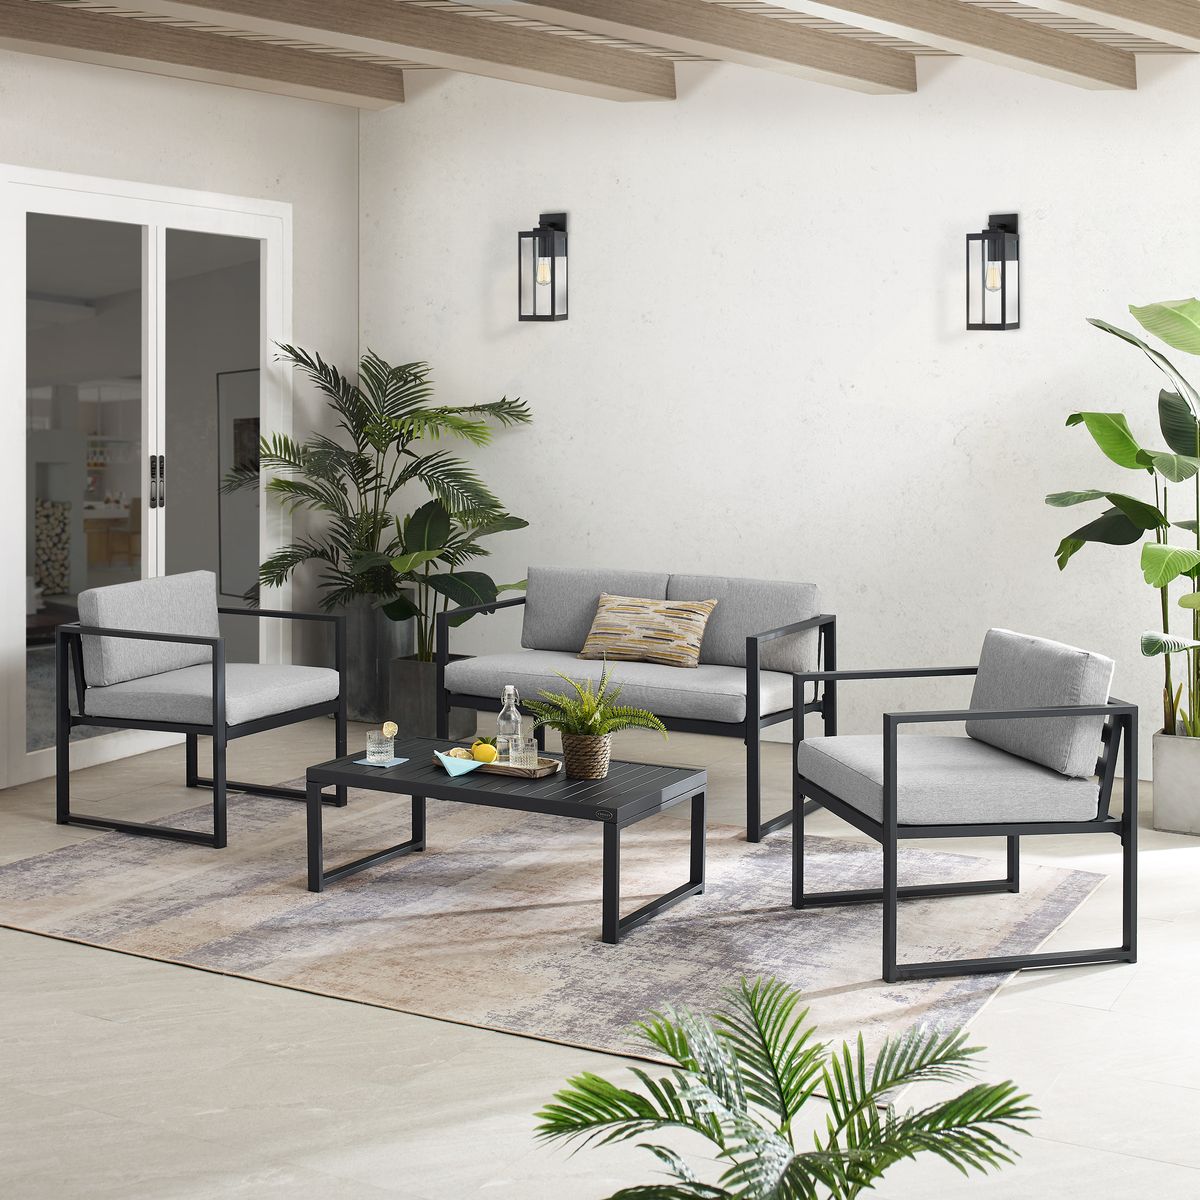 Co7902mb-gy Conversation Set, Gray & Matte Black - Loveseat, Coffee Table & 2 Chairs - 4 Piece